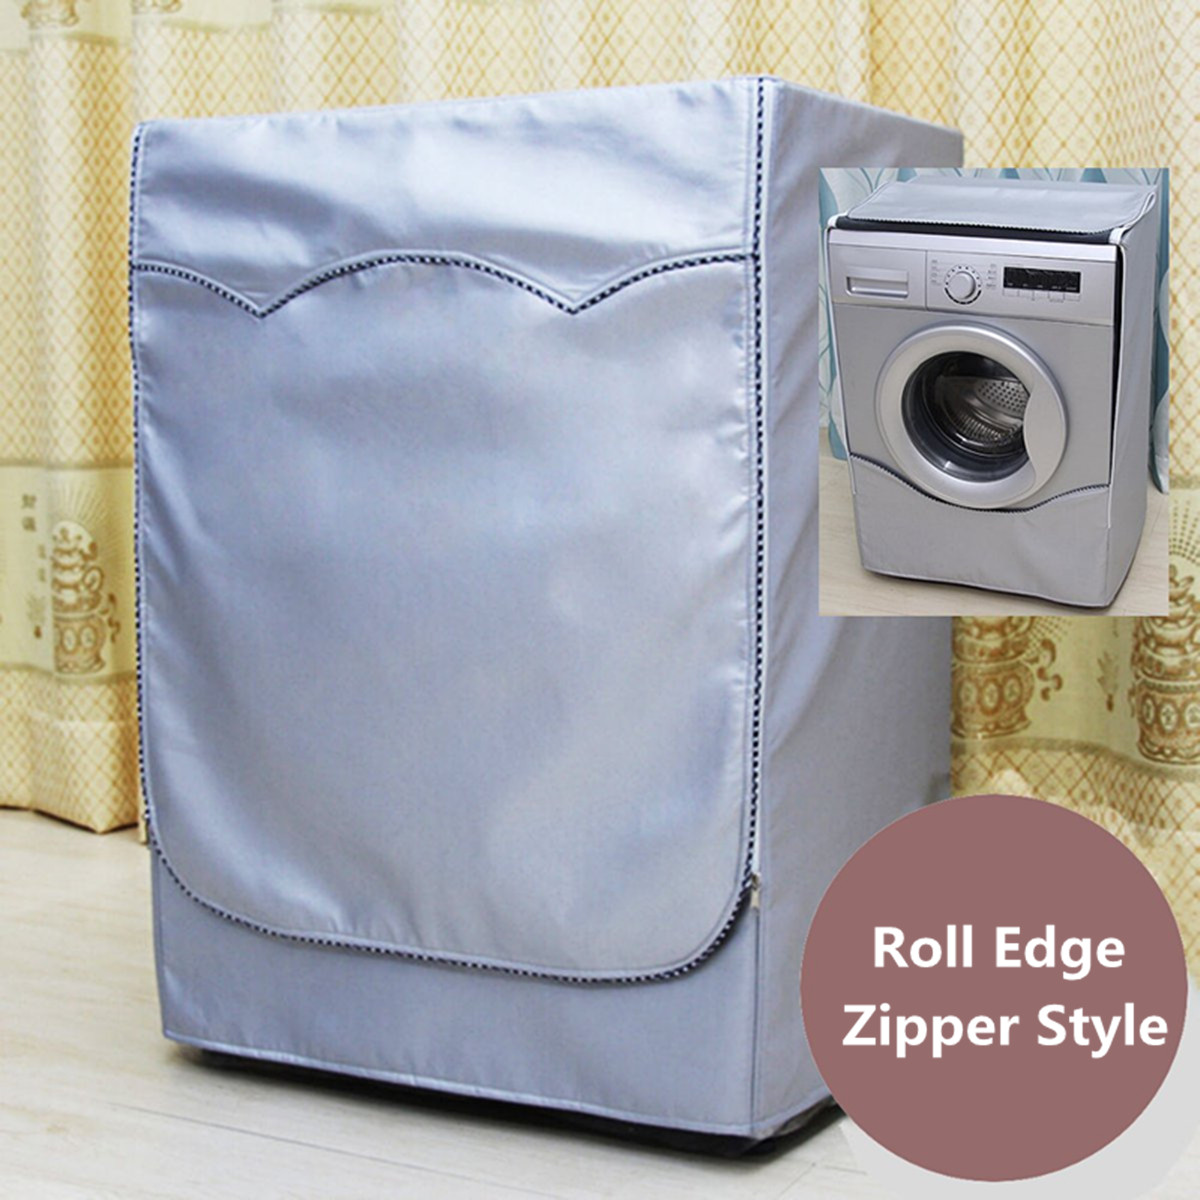 Fully Automatic Roller Washer Sunscreen Washing Machine Waterproof Cover Dryer Silver Dustproof Washing Machine Cover S/M/L/XL